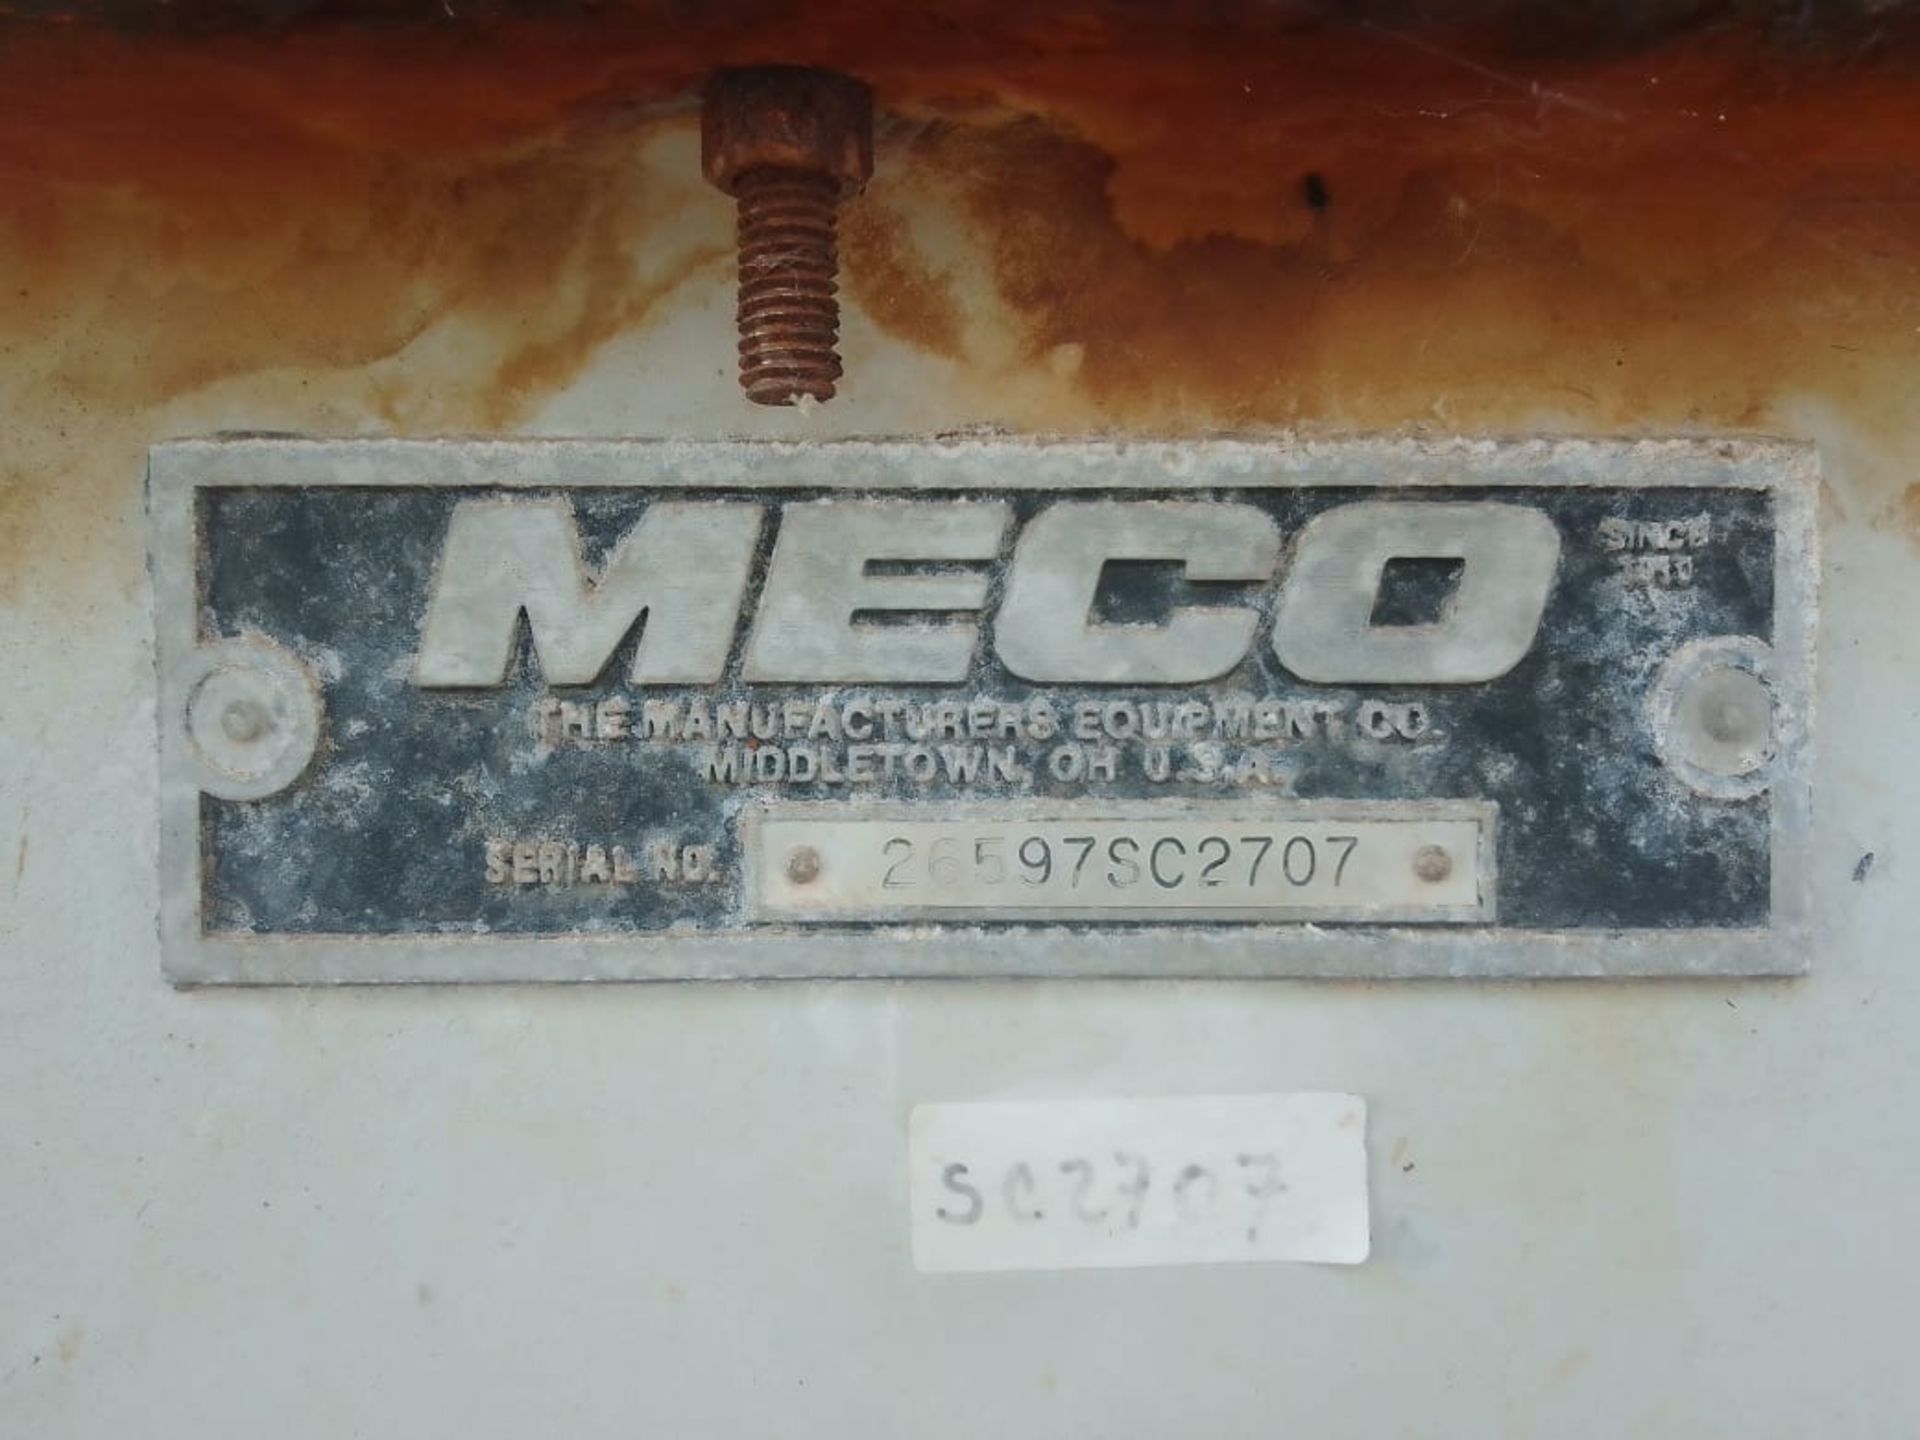 Meco Helicoidal Conveyor in square, Series 26597SC2707, measuring approximately 55 x 50 cm x 10 met - Image 22 of 26